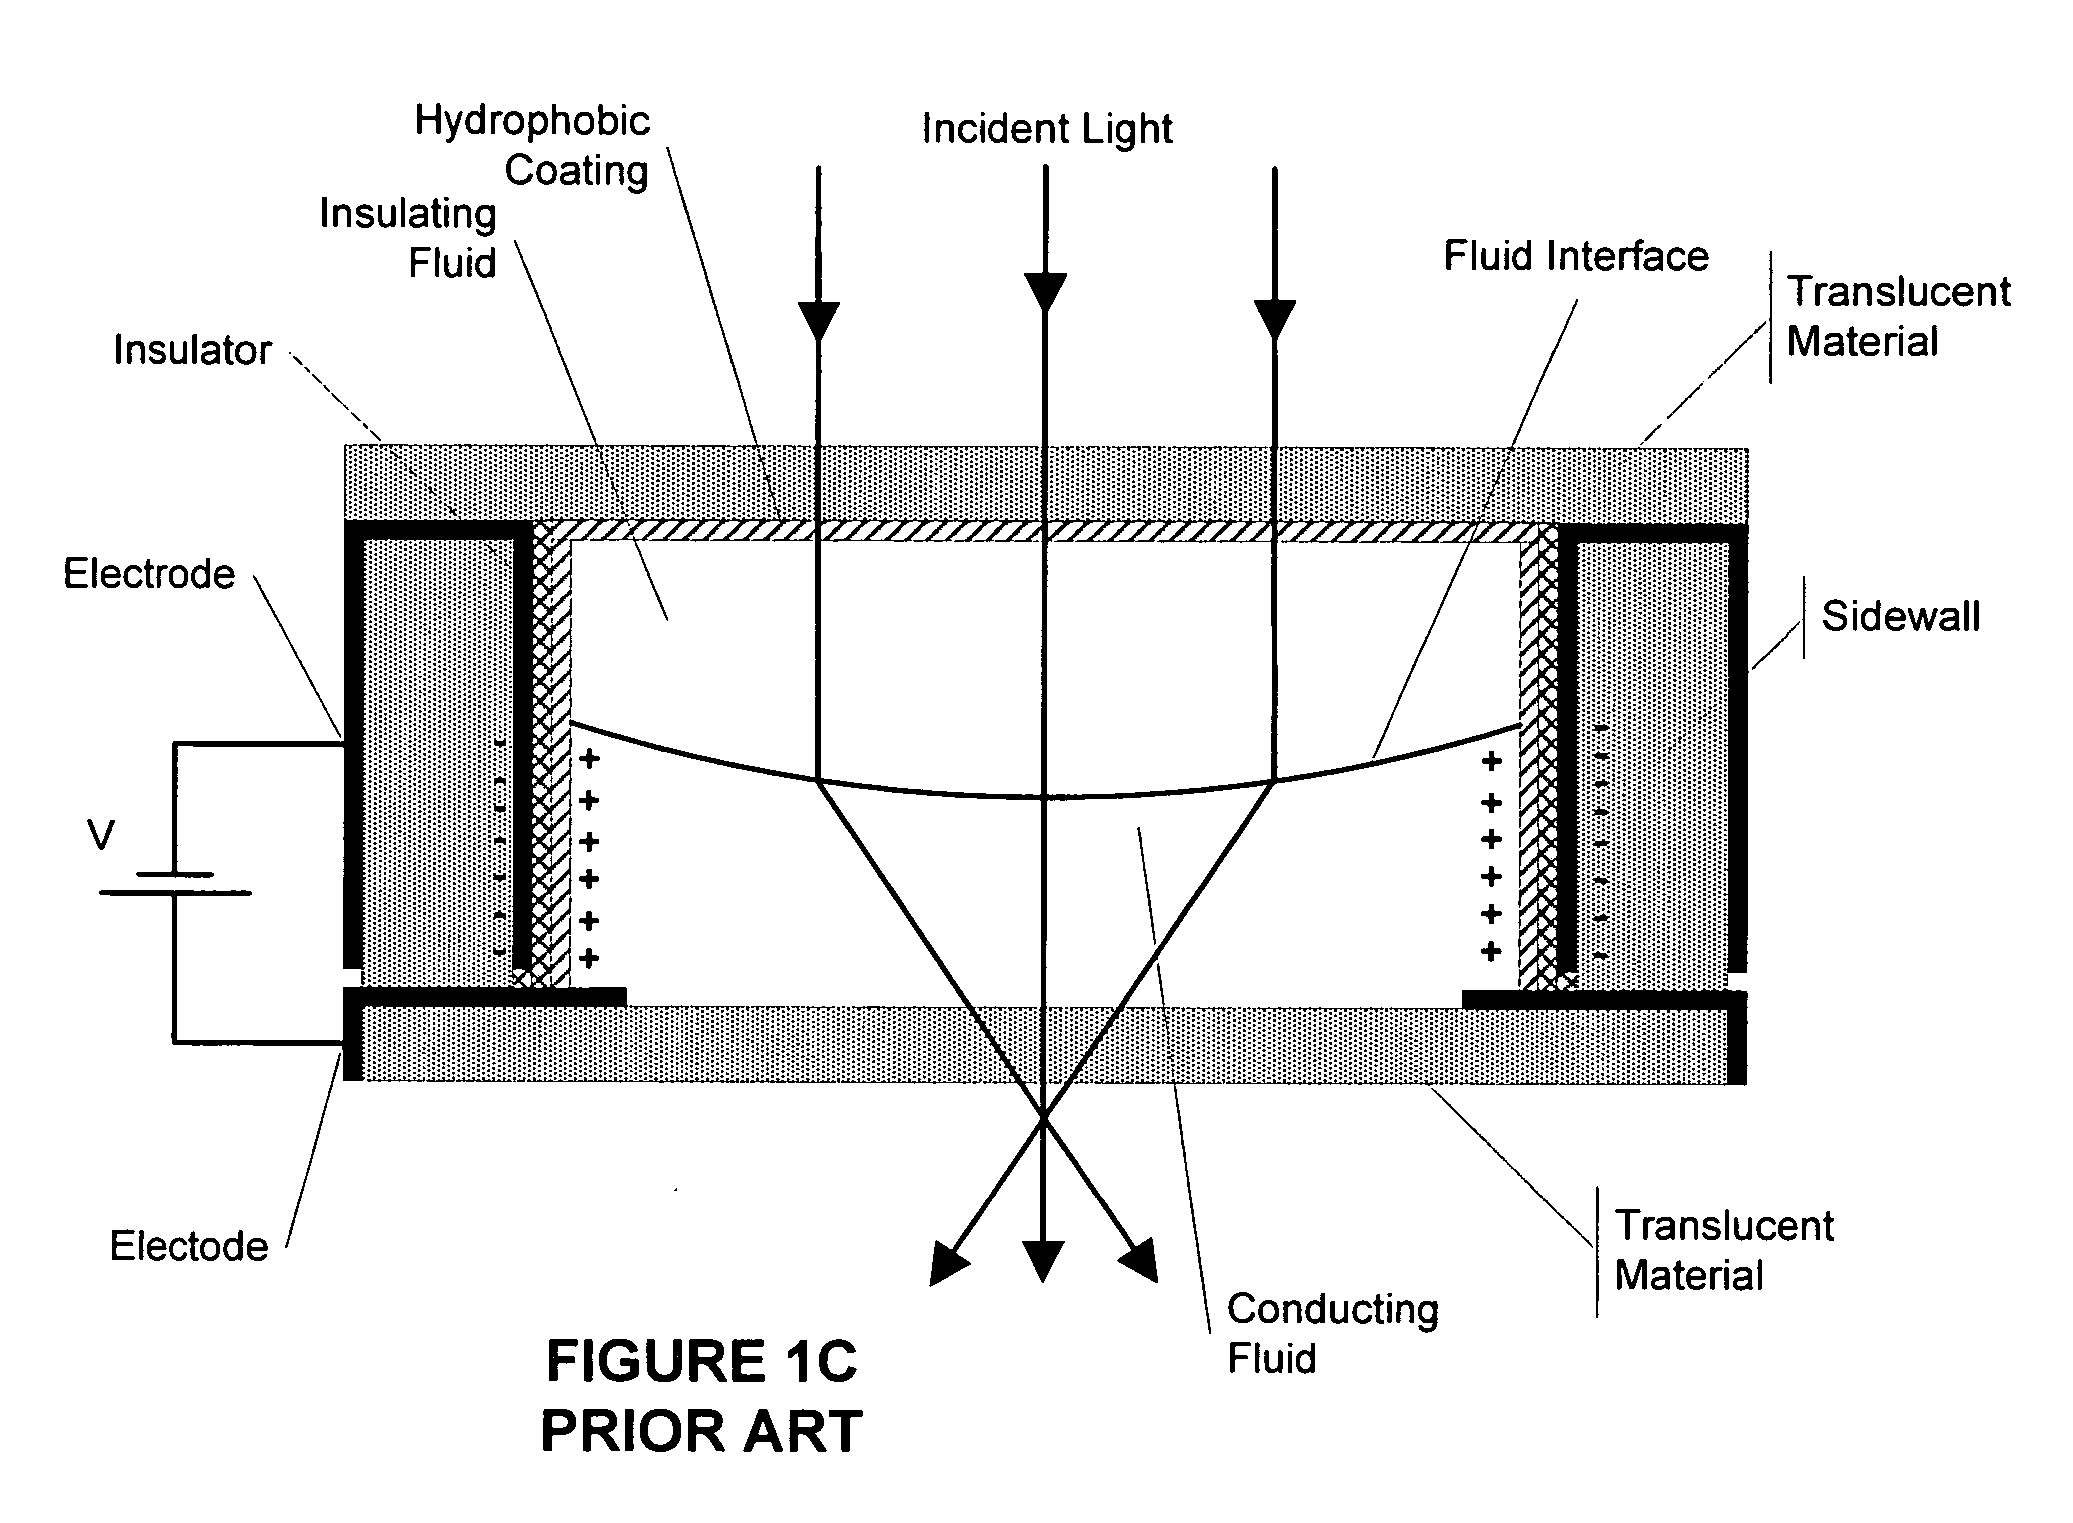 Vehicle service system with variable-lens imaging sensors